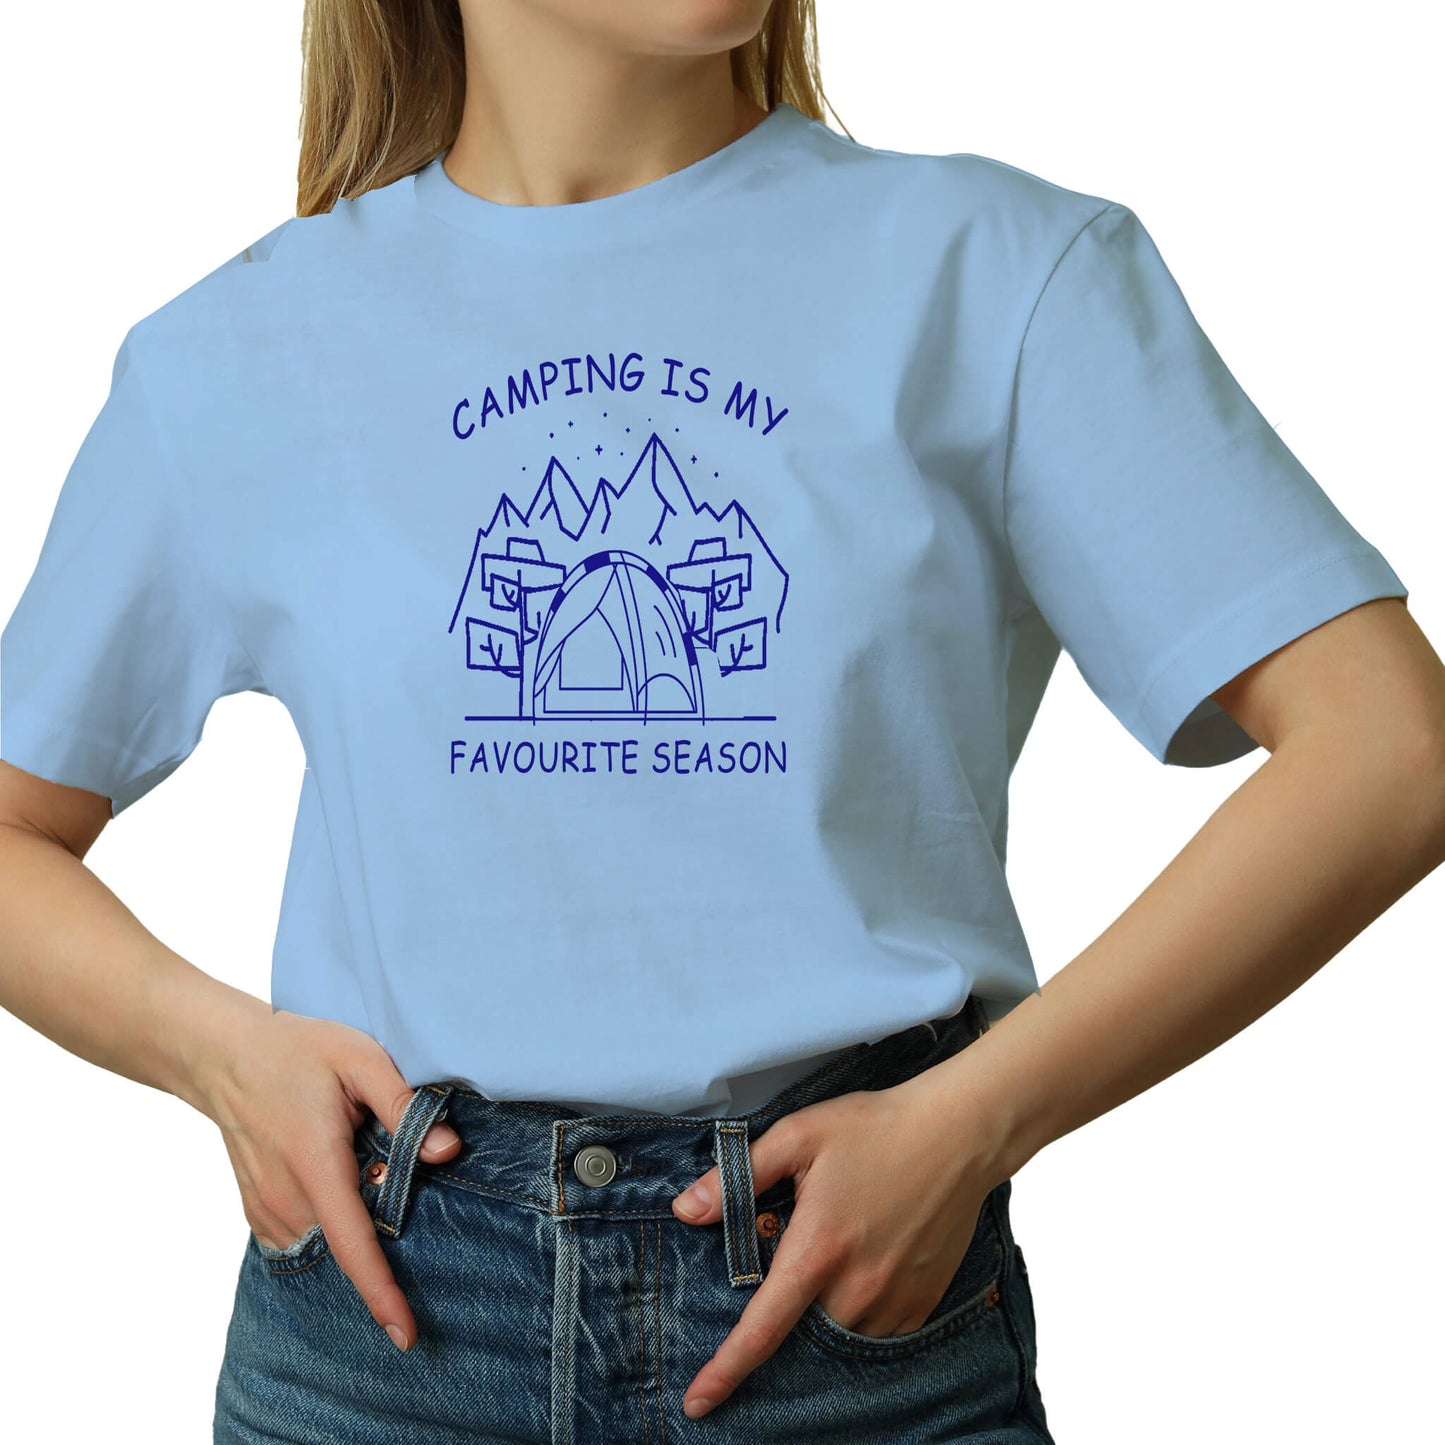  "Blue Graphic tee with an illustration of a tent, surrounded by nature. Text reads: 'Camping is my favorite season.' Celebrate the great outdoors!"